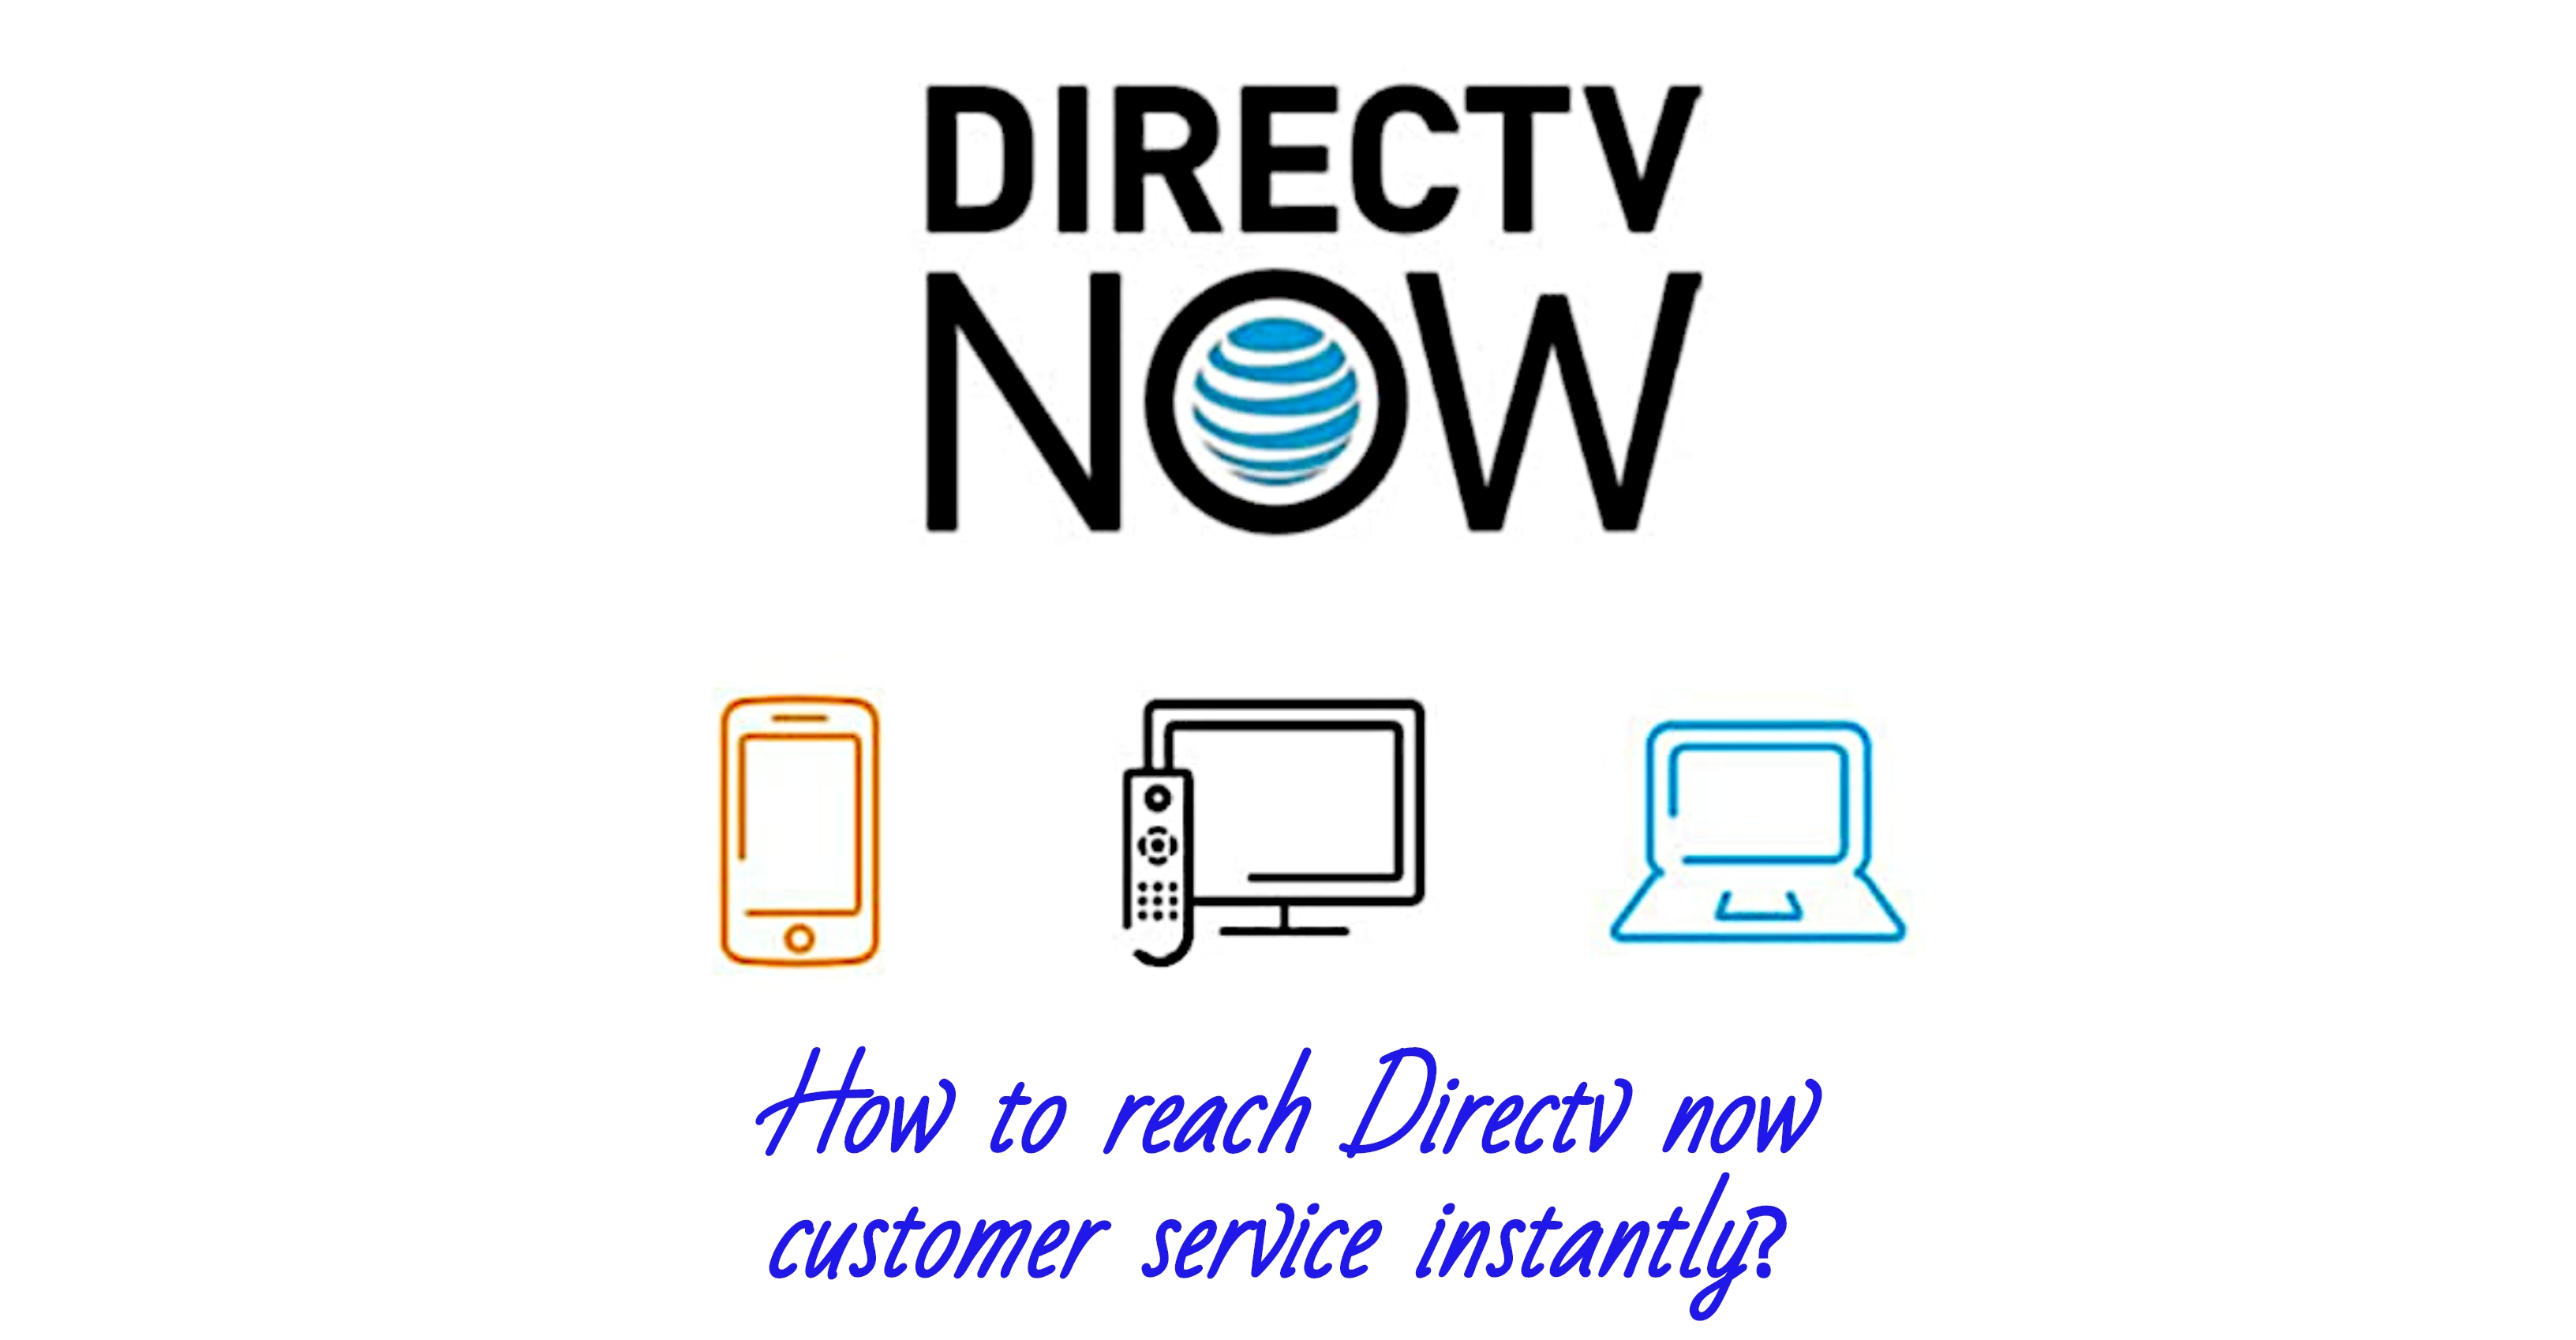 directv-now-customer-service-how-to-reach-instantly